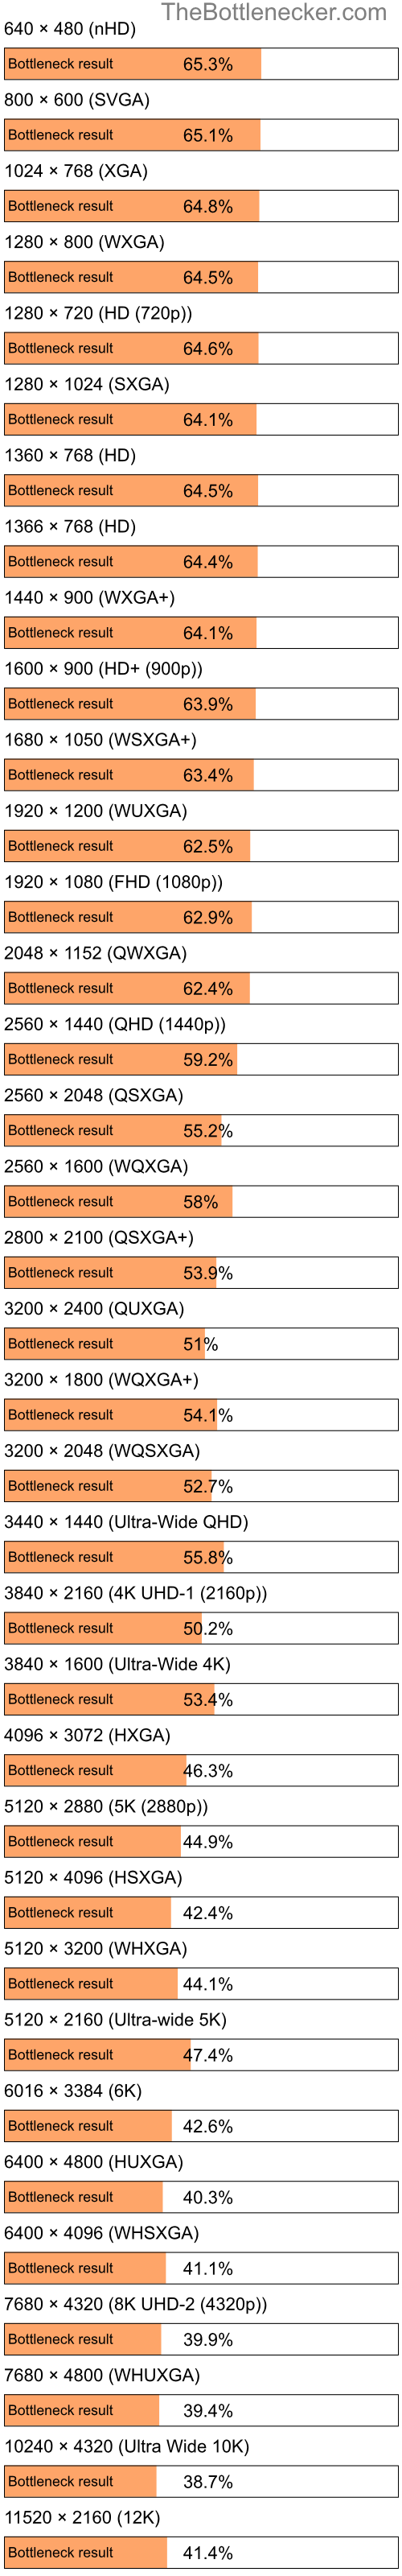 Bottleneck results by resolution for Intel Core i5-6500 and NVIDIA GeForce RTX 3060 Ti in Processor Intense Tasks